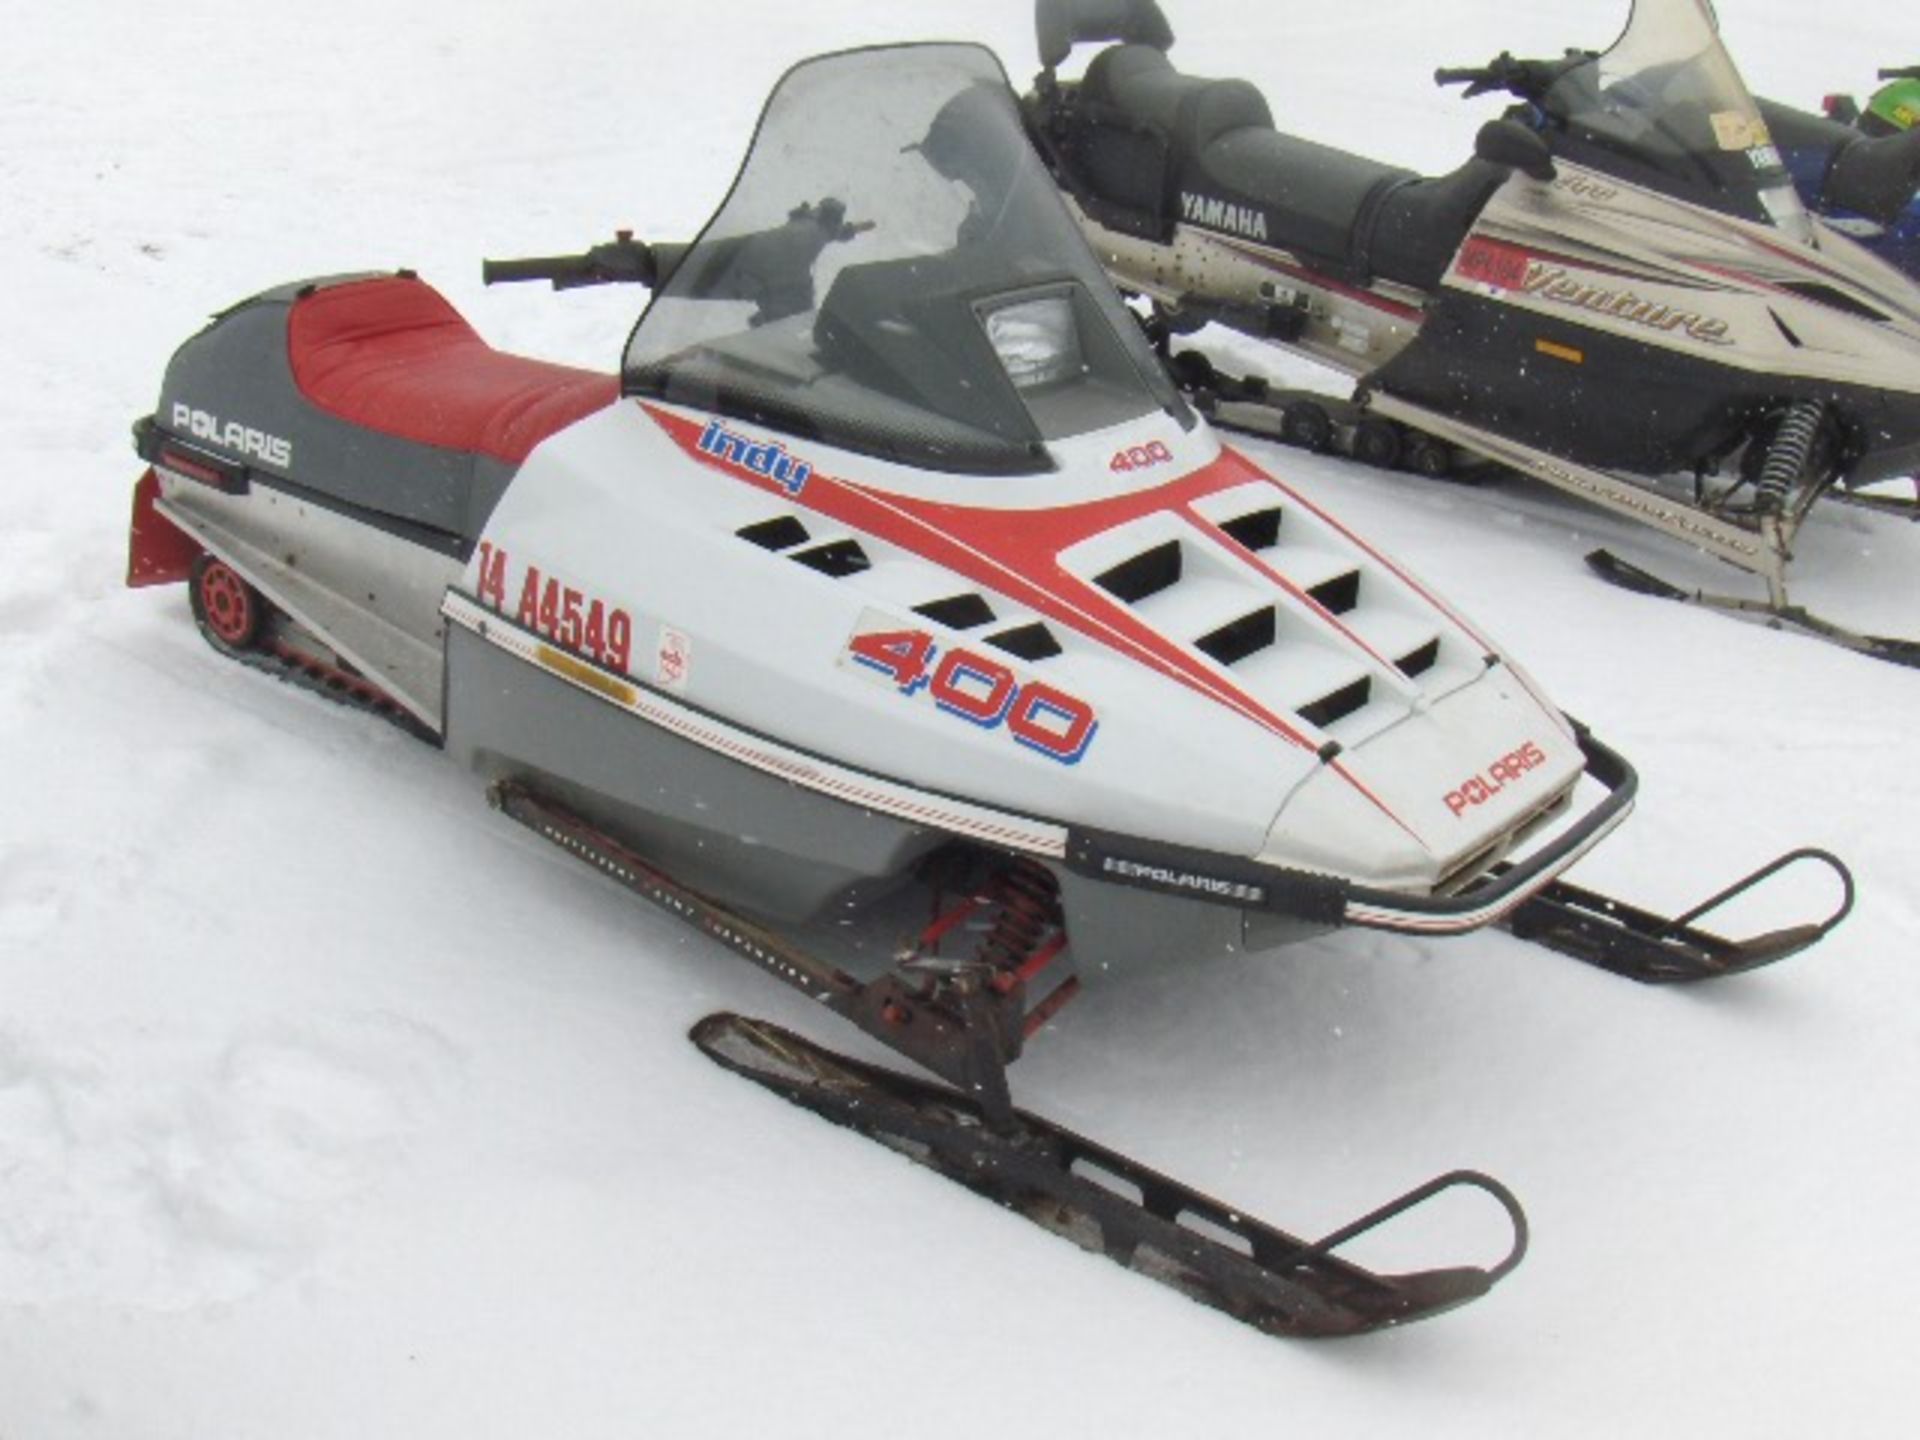 1988 POLARIS 400 INDY  1629912 snowmobile, sold with a signed registration - Image 2 of 4